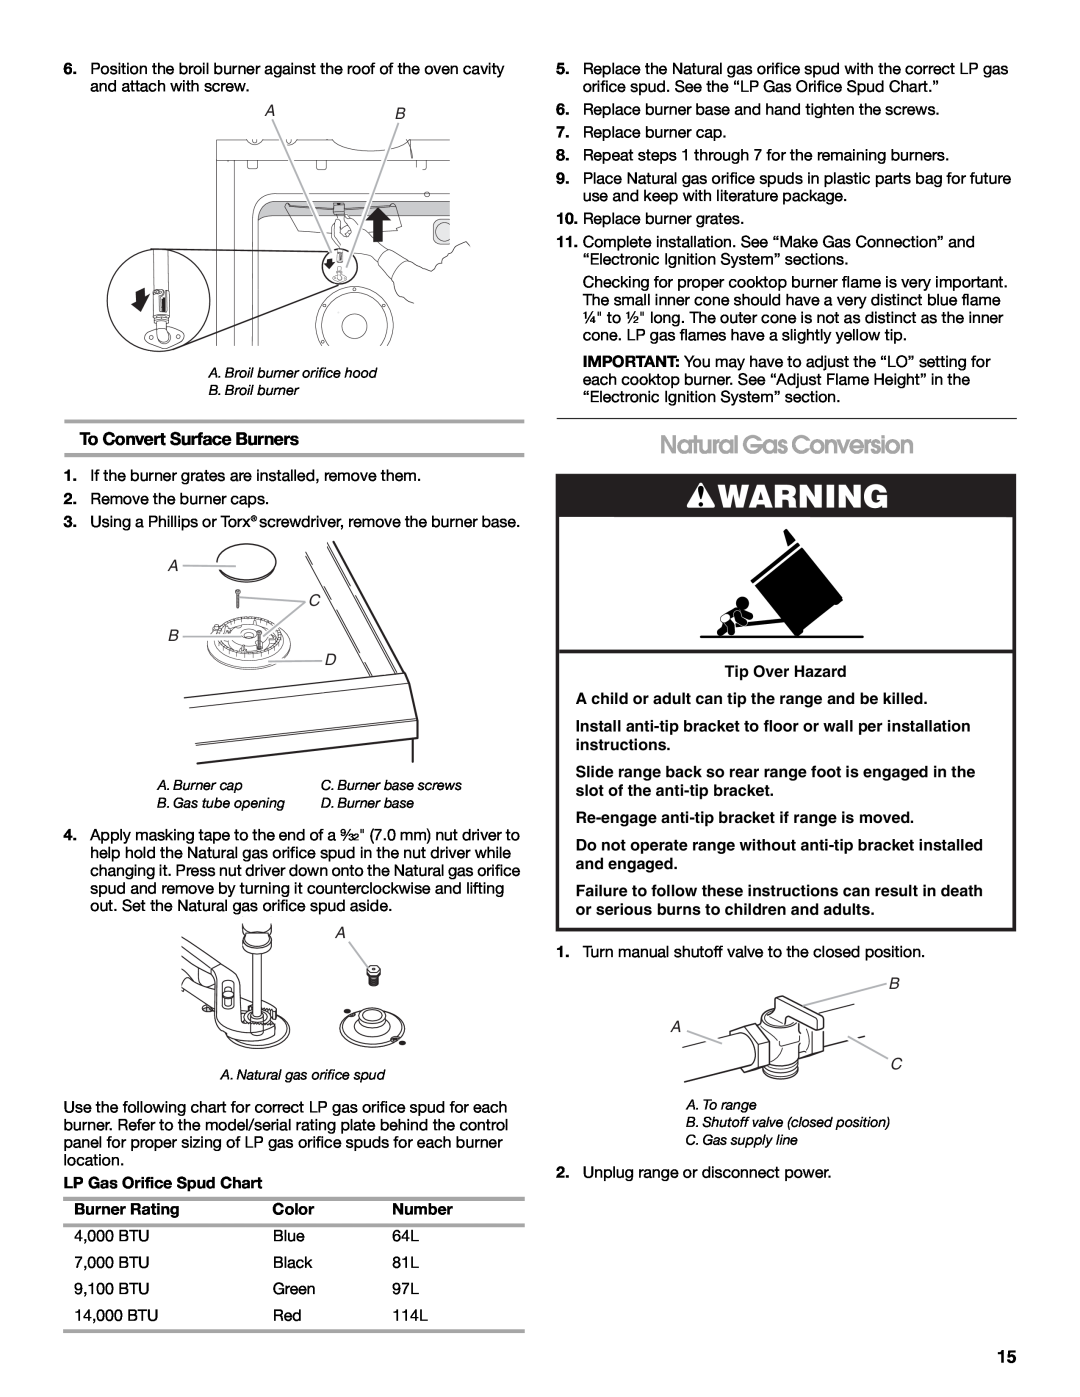 Whirlpool W10526071A installation instructions Natural Gas Conversion, To Convert Surface Burners, A C B D, B A C 